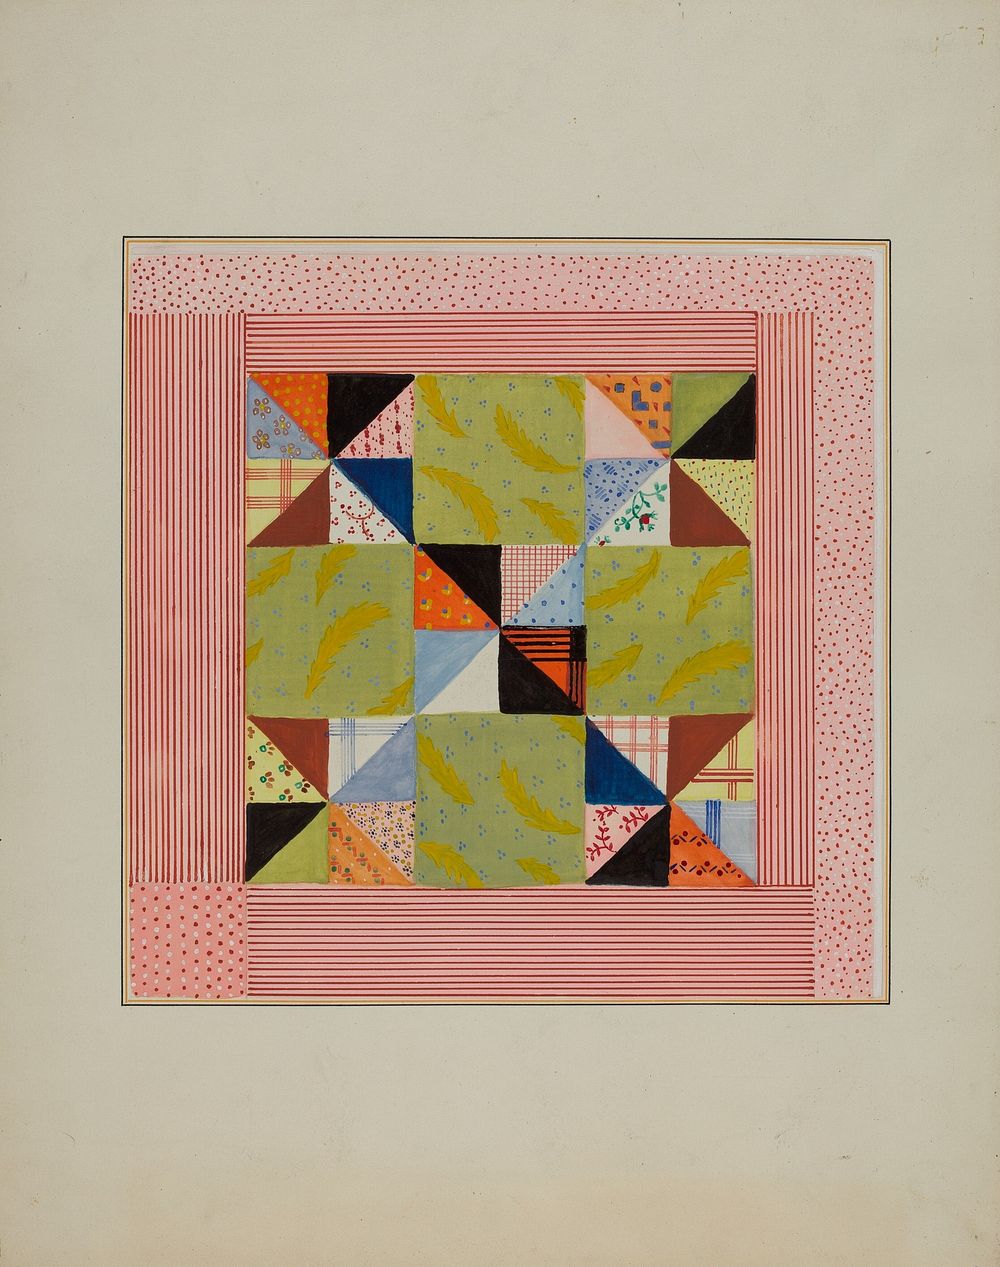 Quilt Section (c. 1940) by Cornelius Christoffels.  